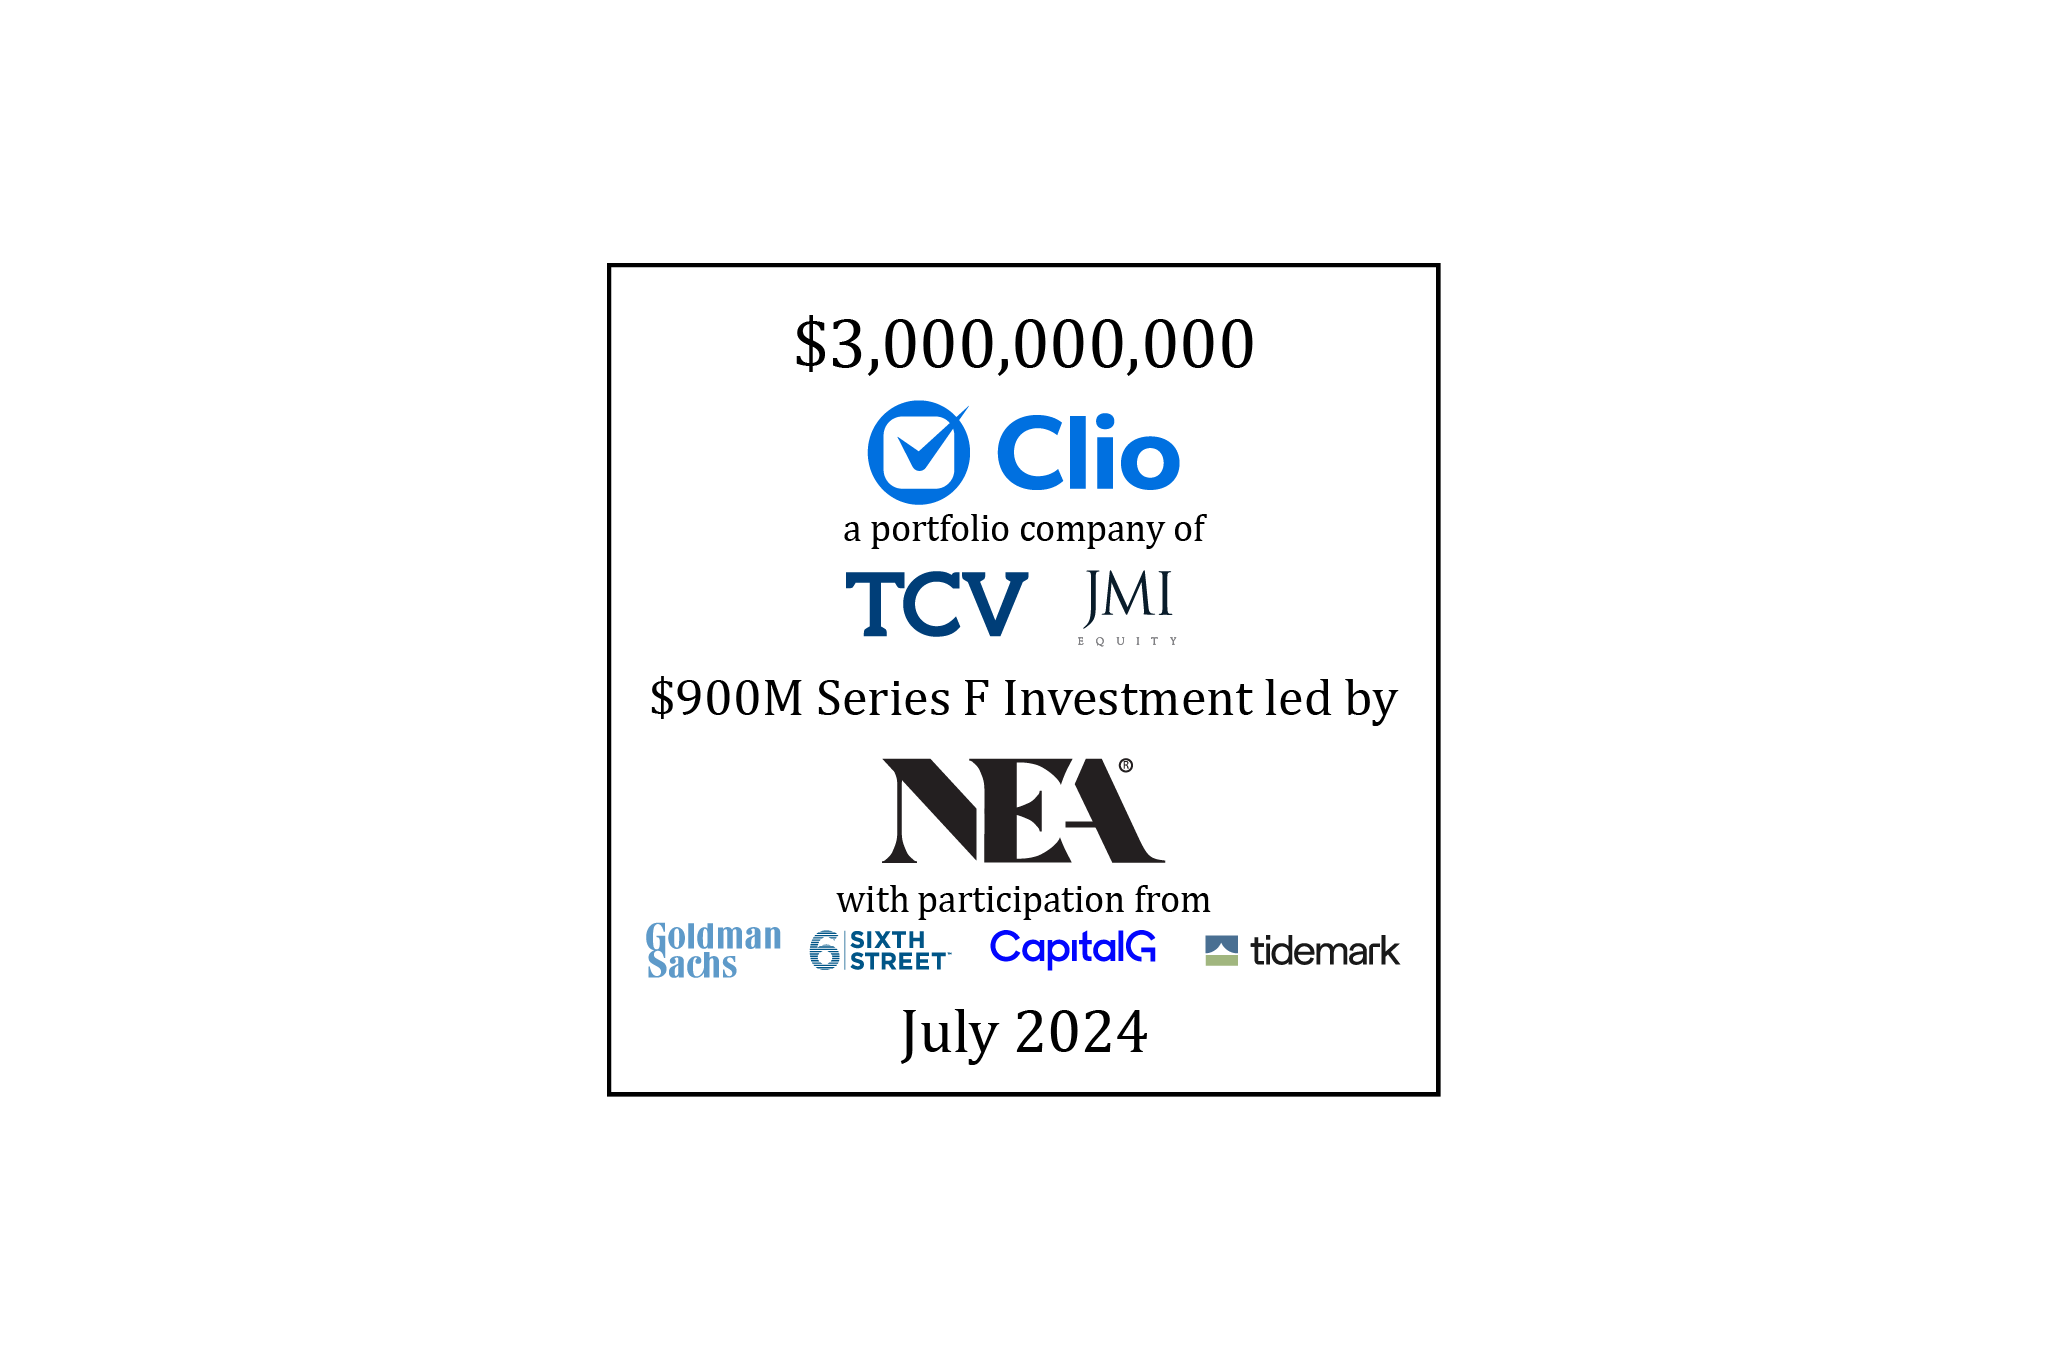 $3,000,000,000 | Clio (logo), a portfolio company of TCV and JMI Equity, $900M Series F Investment led by NEA with participation from Goldman Sachs Asset Management, Sixth Street, CapitalG, and Tidemark | July 2024